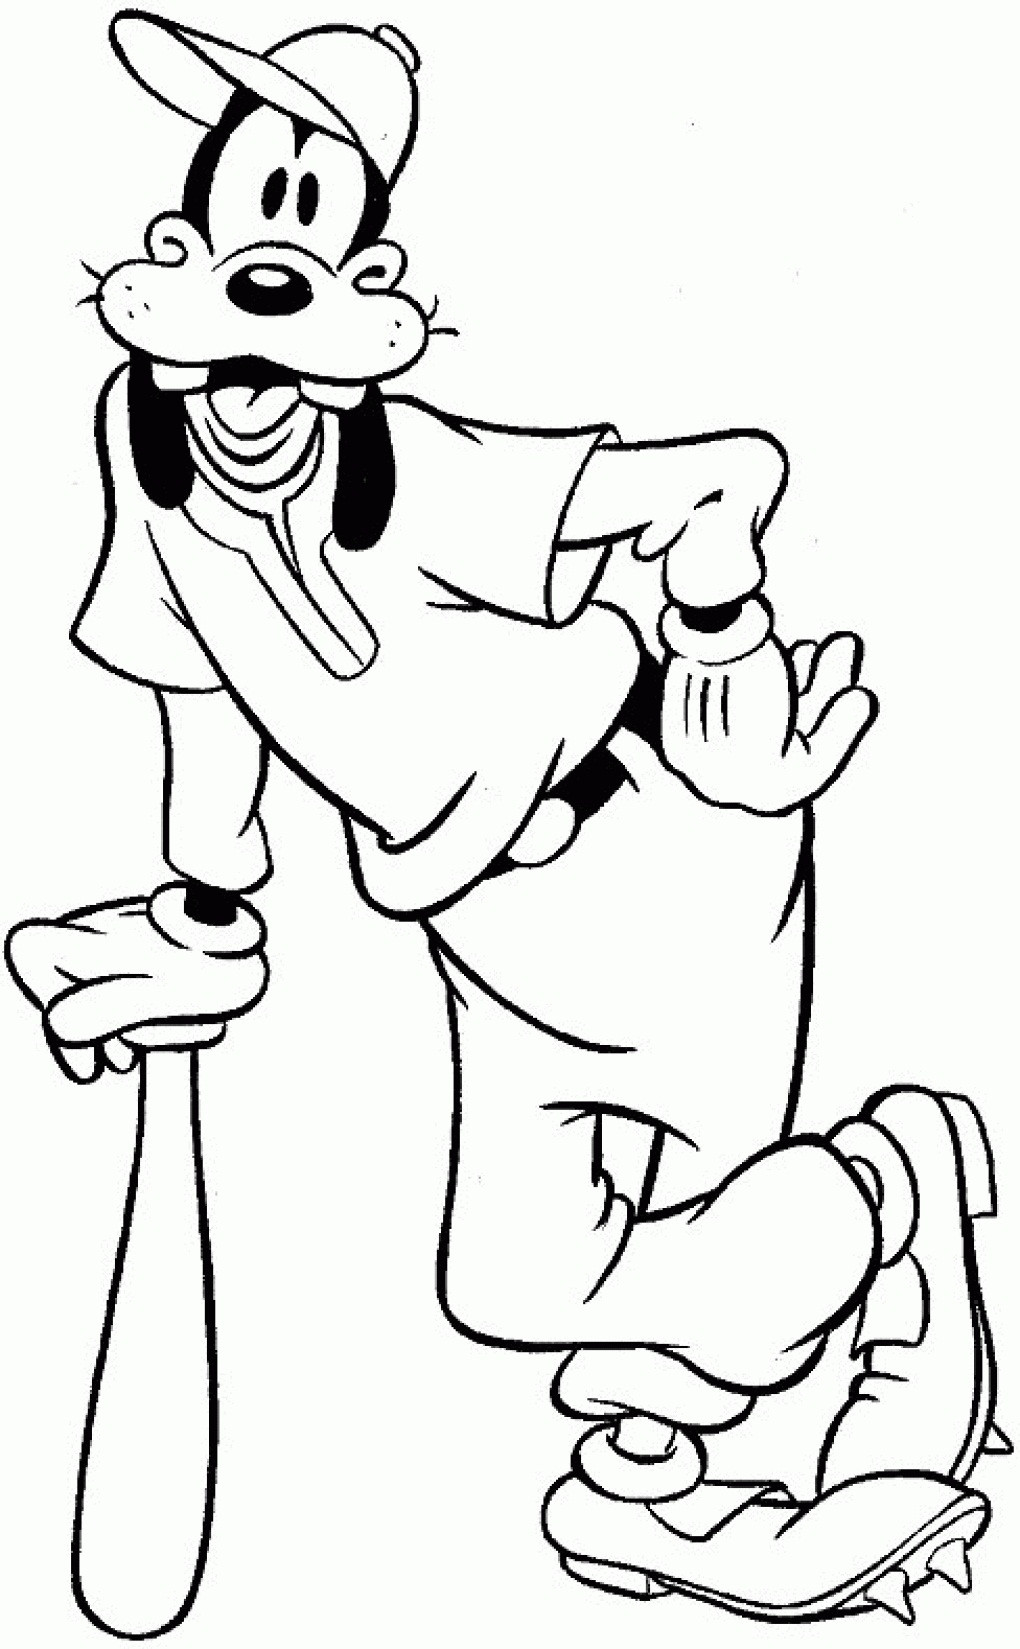 Disney Coloring Pages For Kids To Print Out
 Free Printable Goofy Coloring Pages For Kids